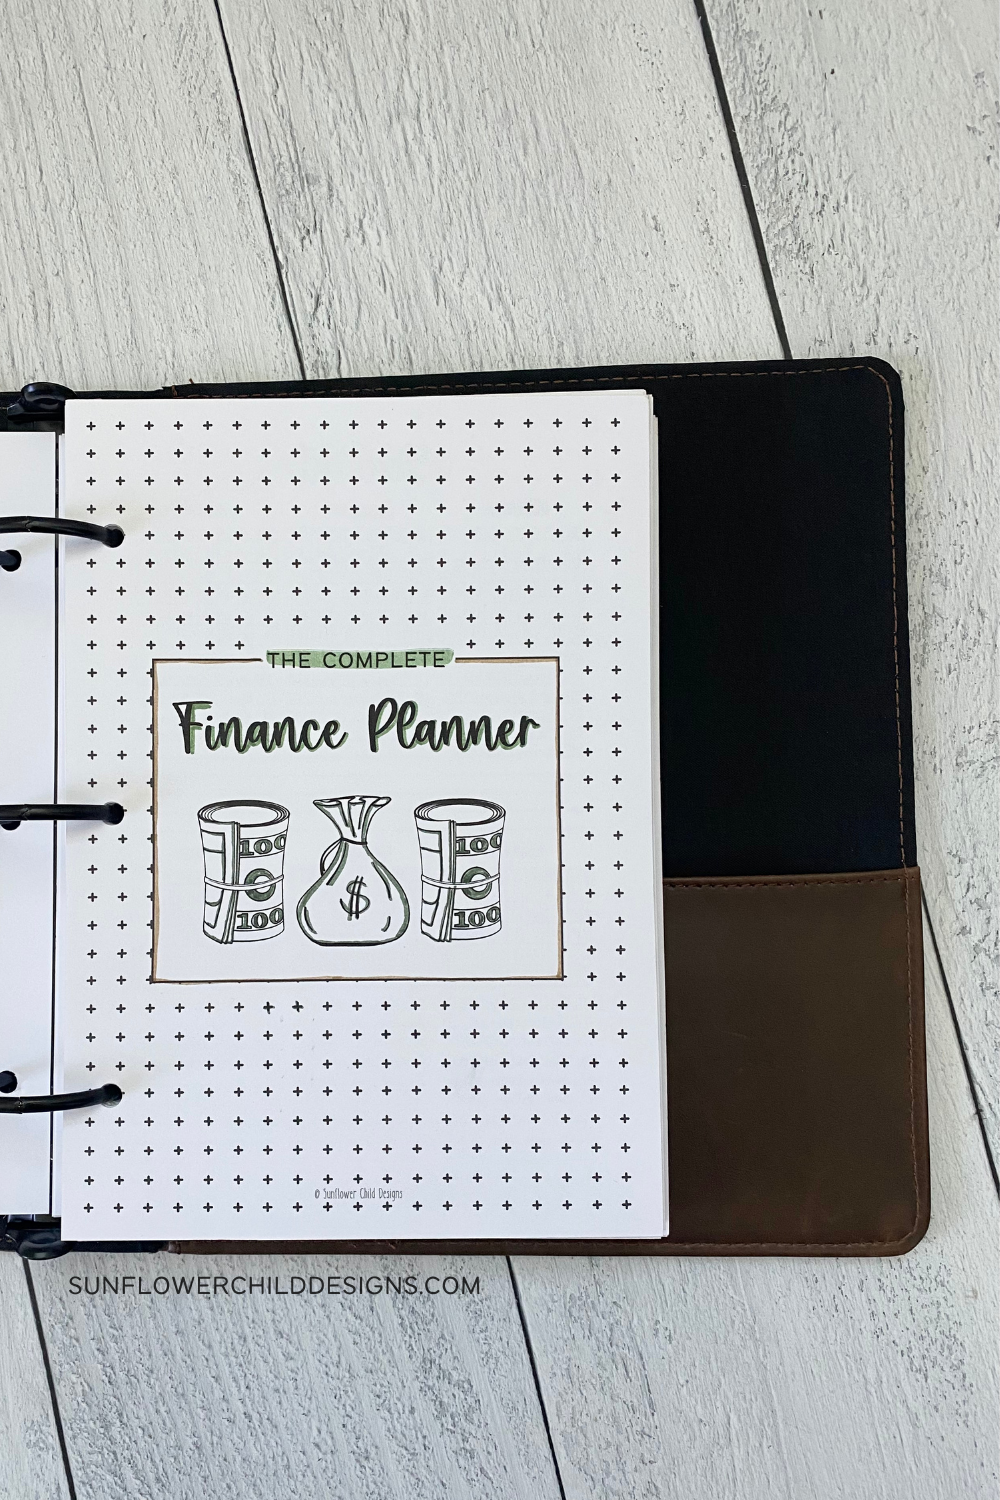 Finance Planner Cover Page